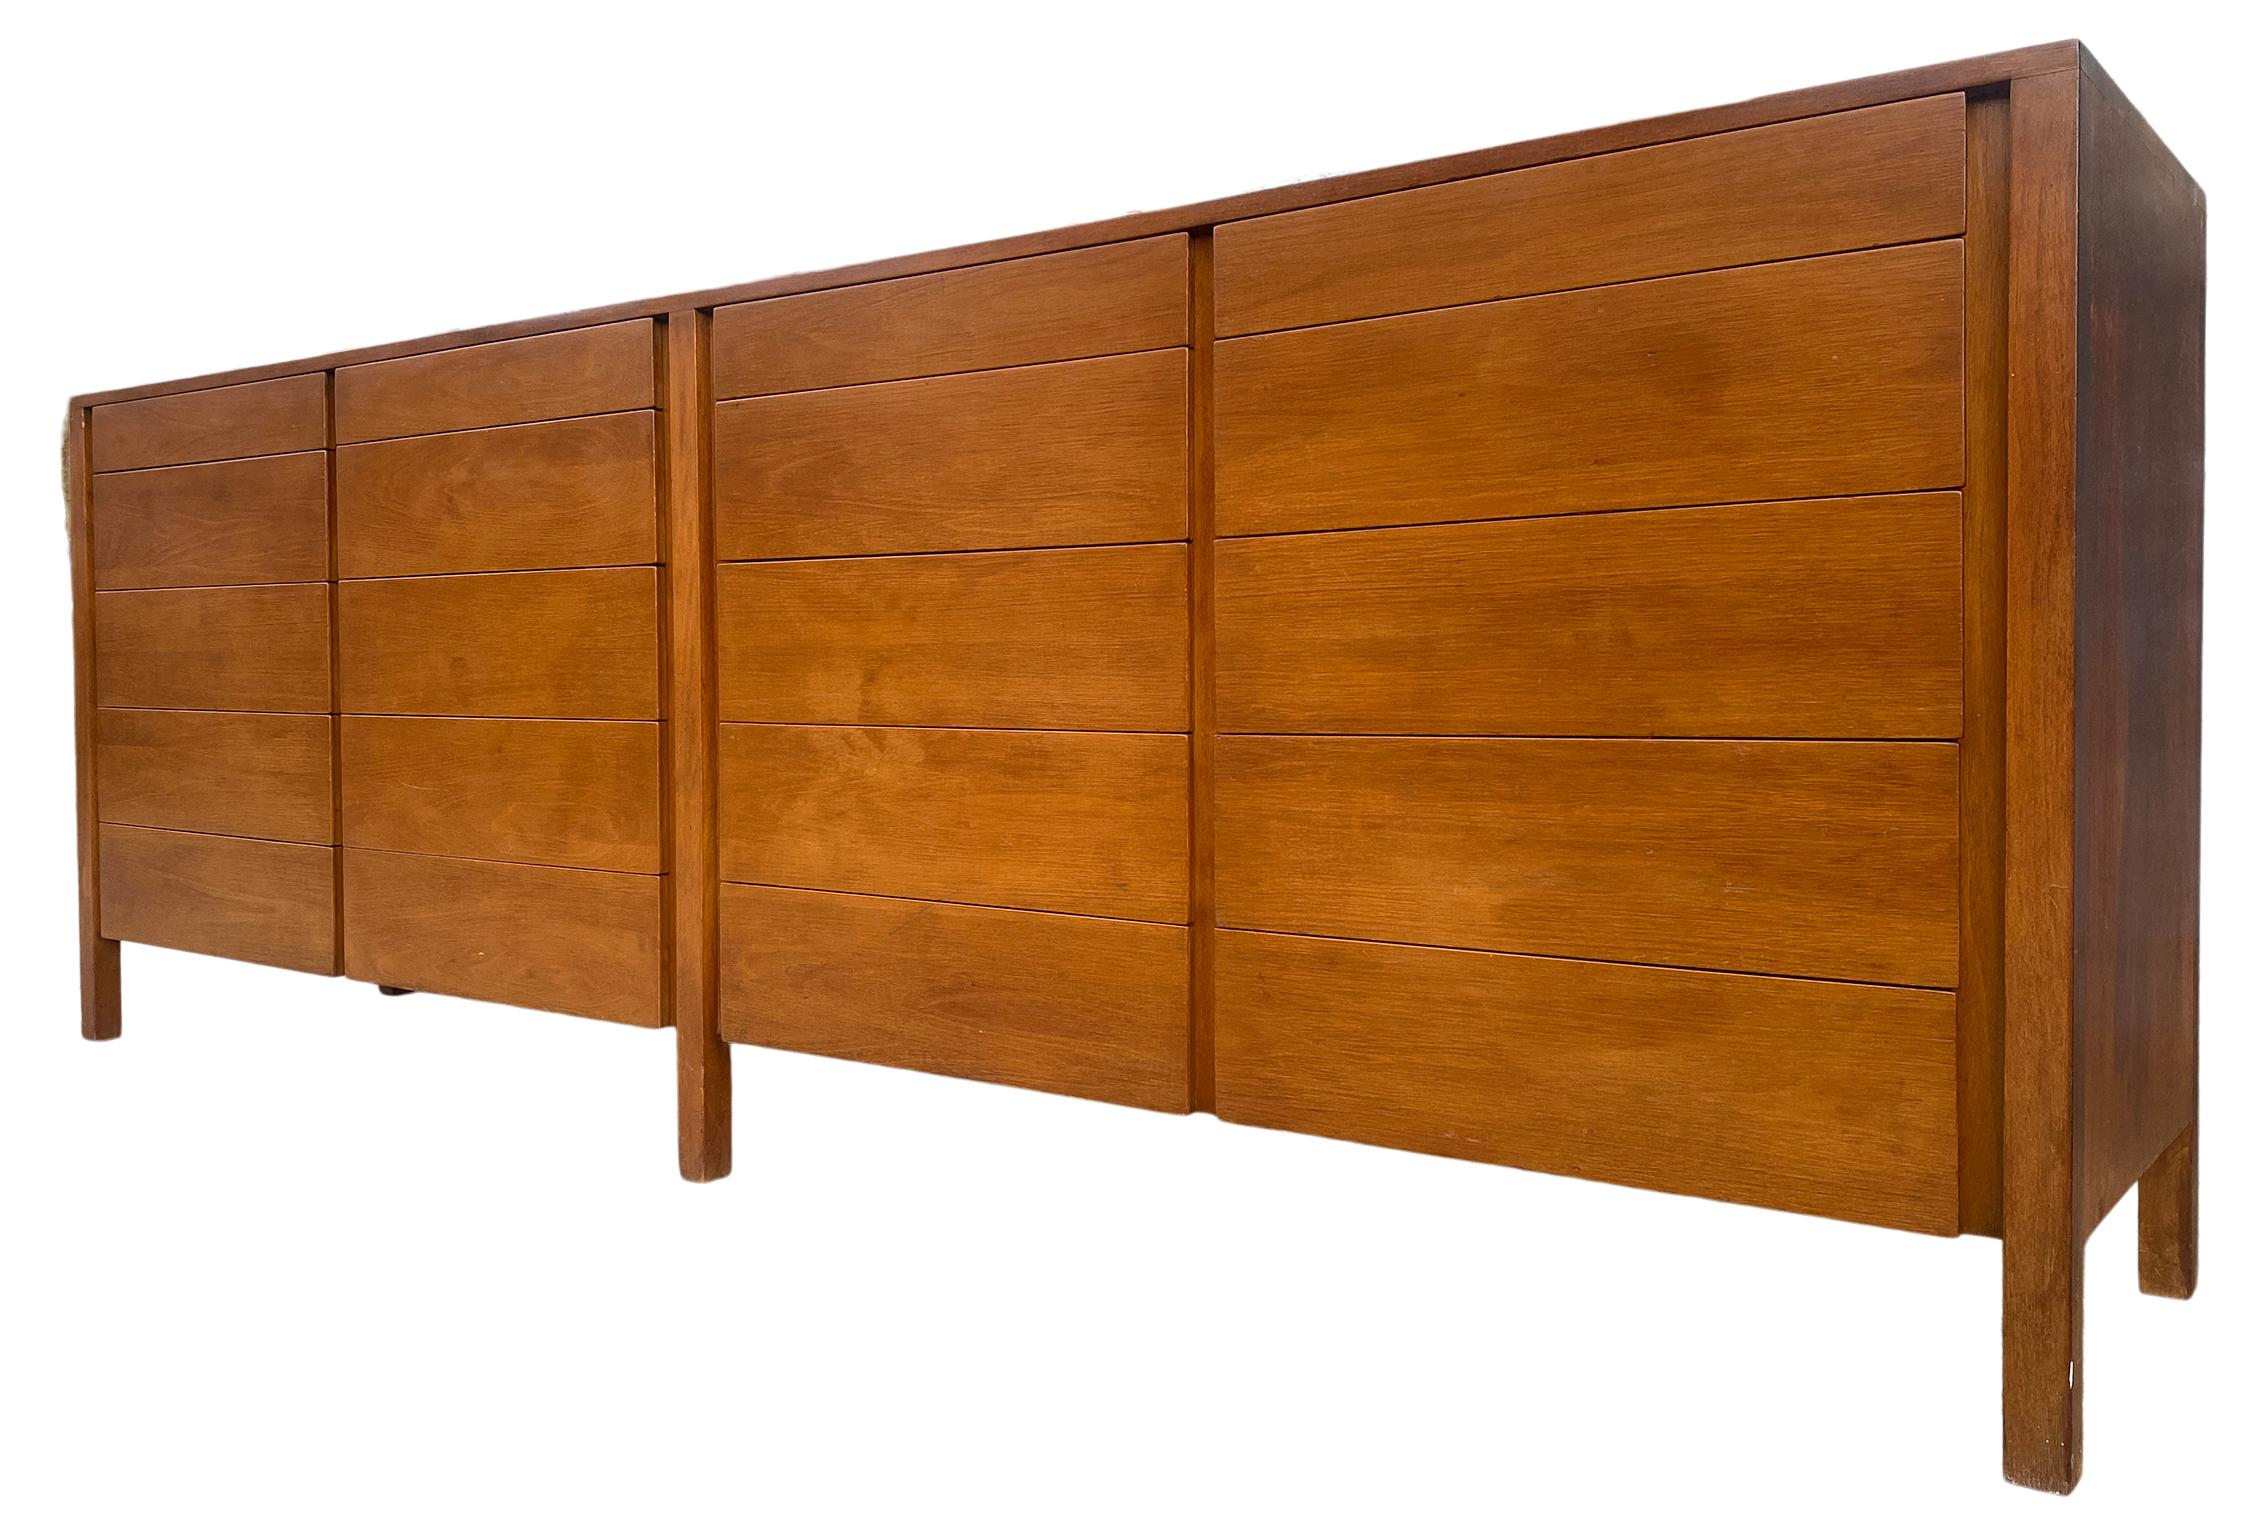 American Mid-Century Modern Credenza Dresser with 20 Drawers Custom Made